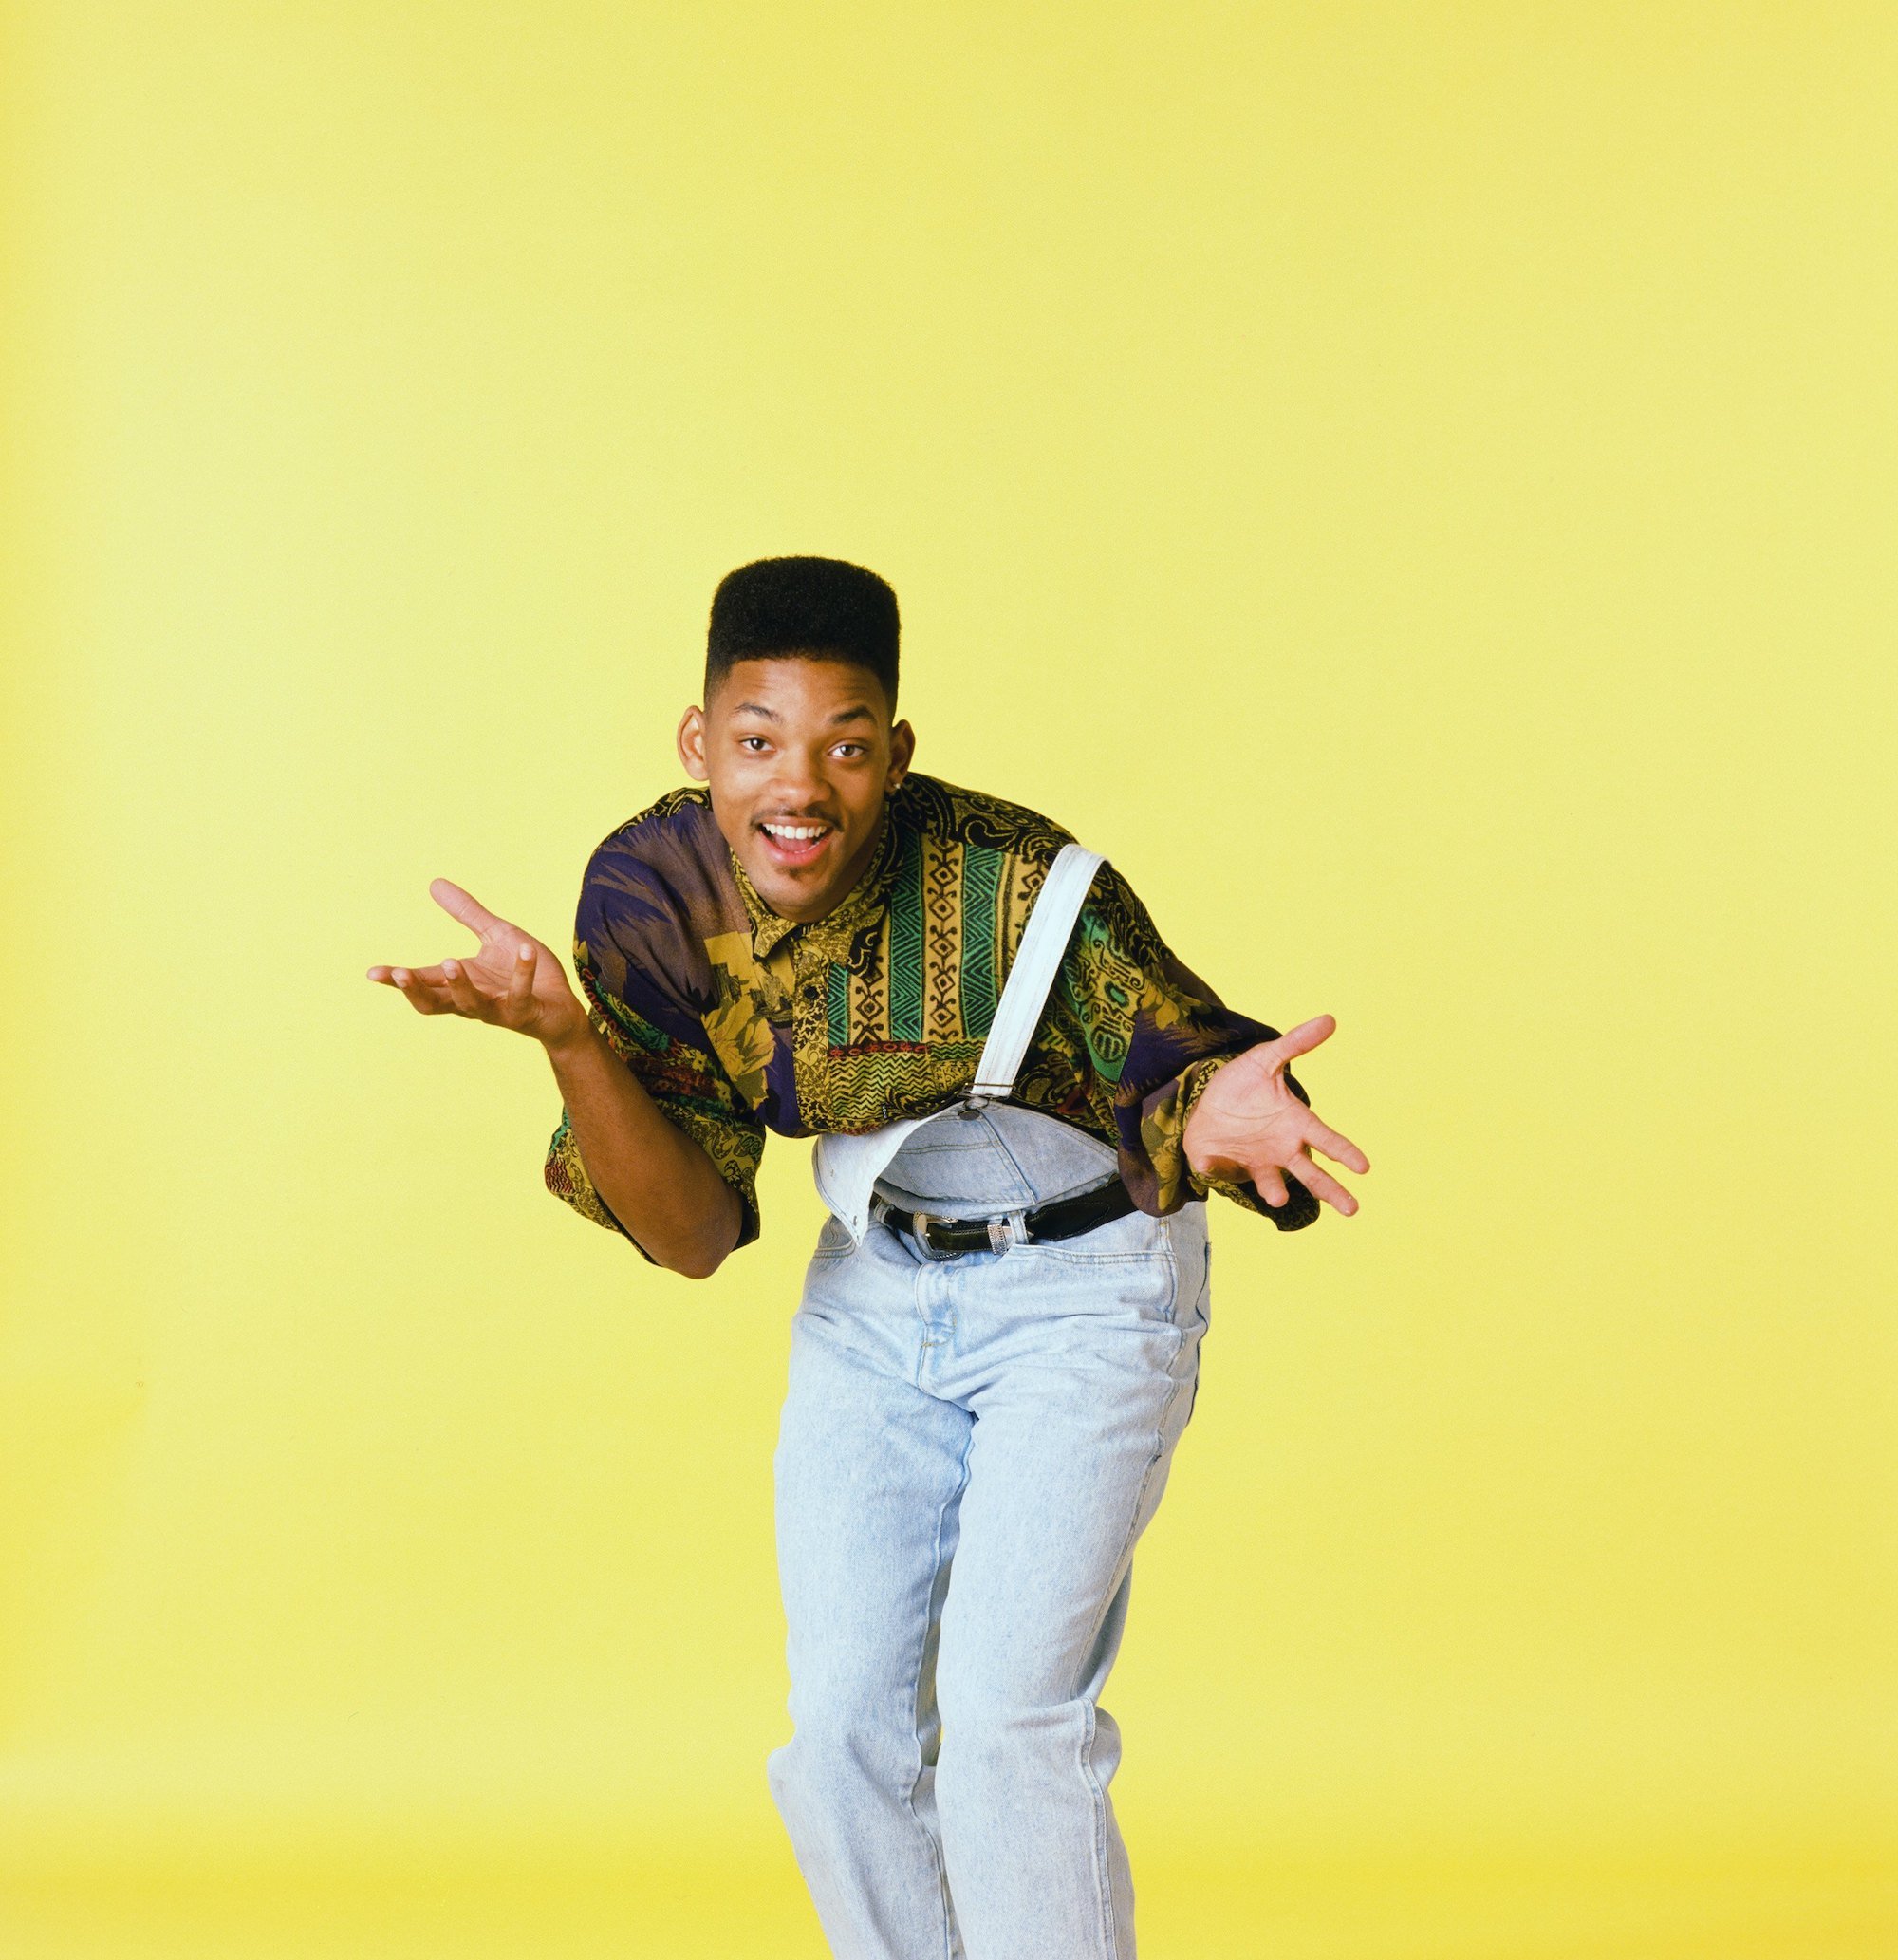 Will Smith shrugs with his overalls open